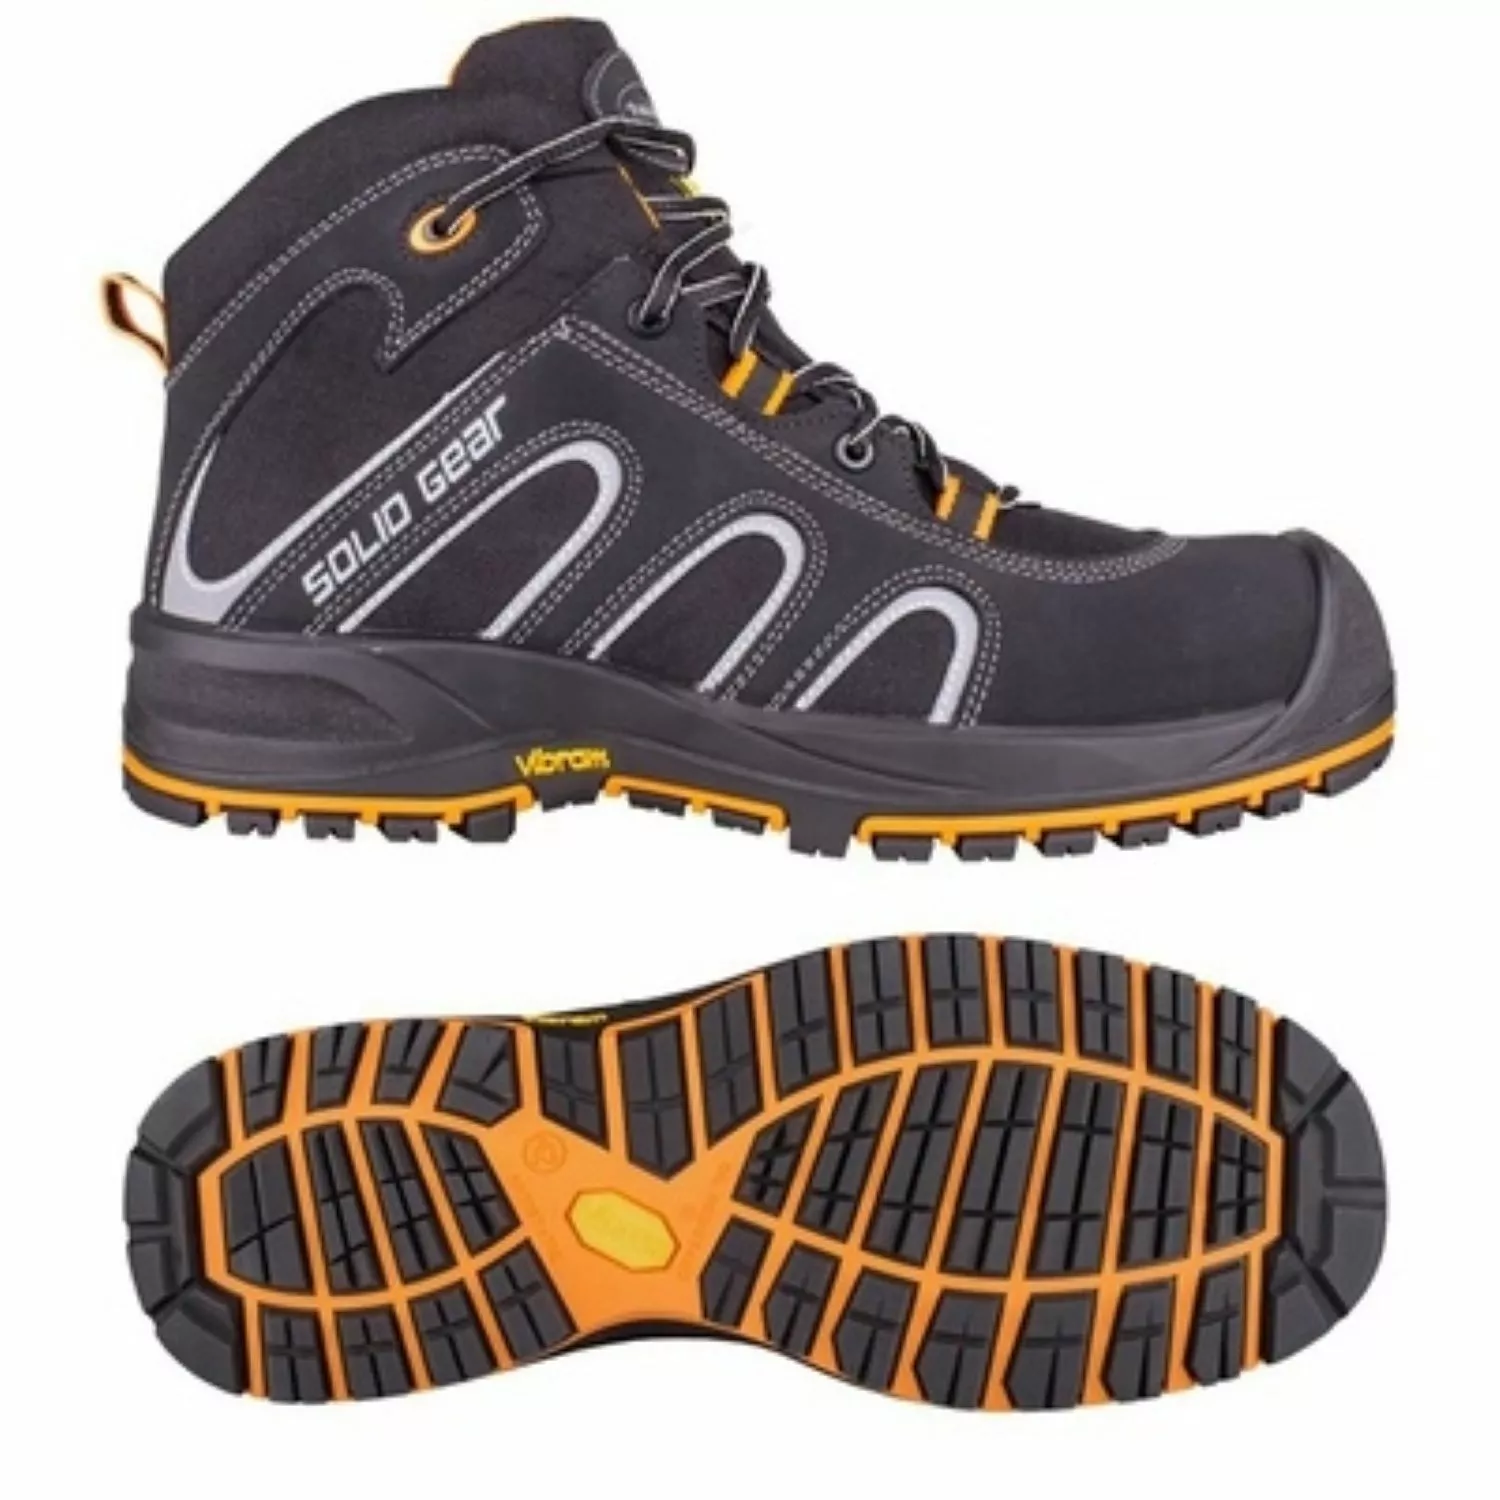 Solid Gear 73002 Falcon chaussure de travail - taille 46-image